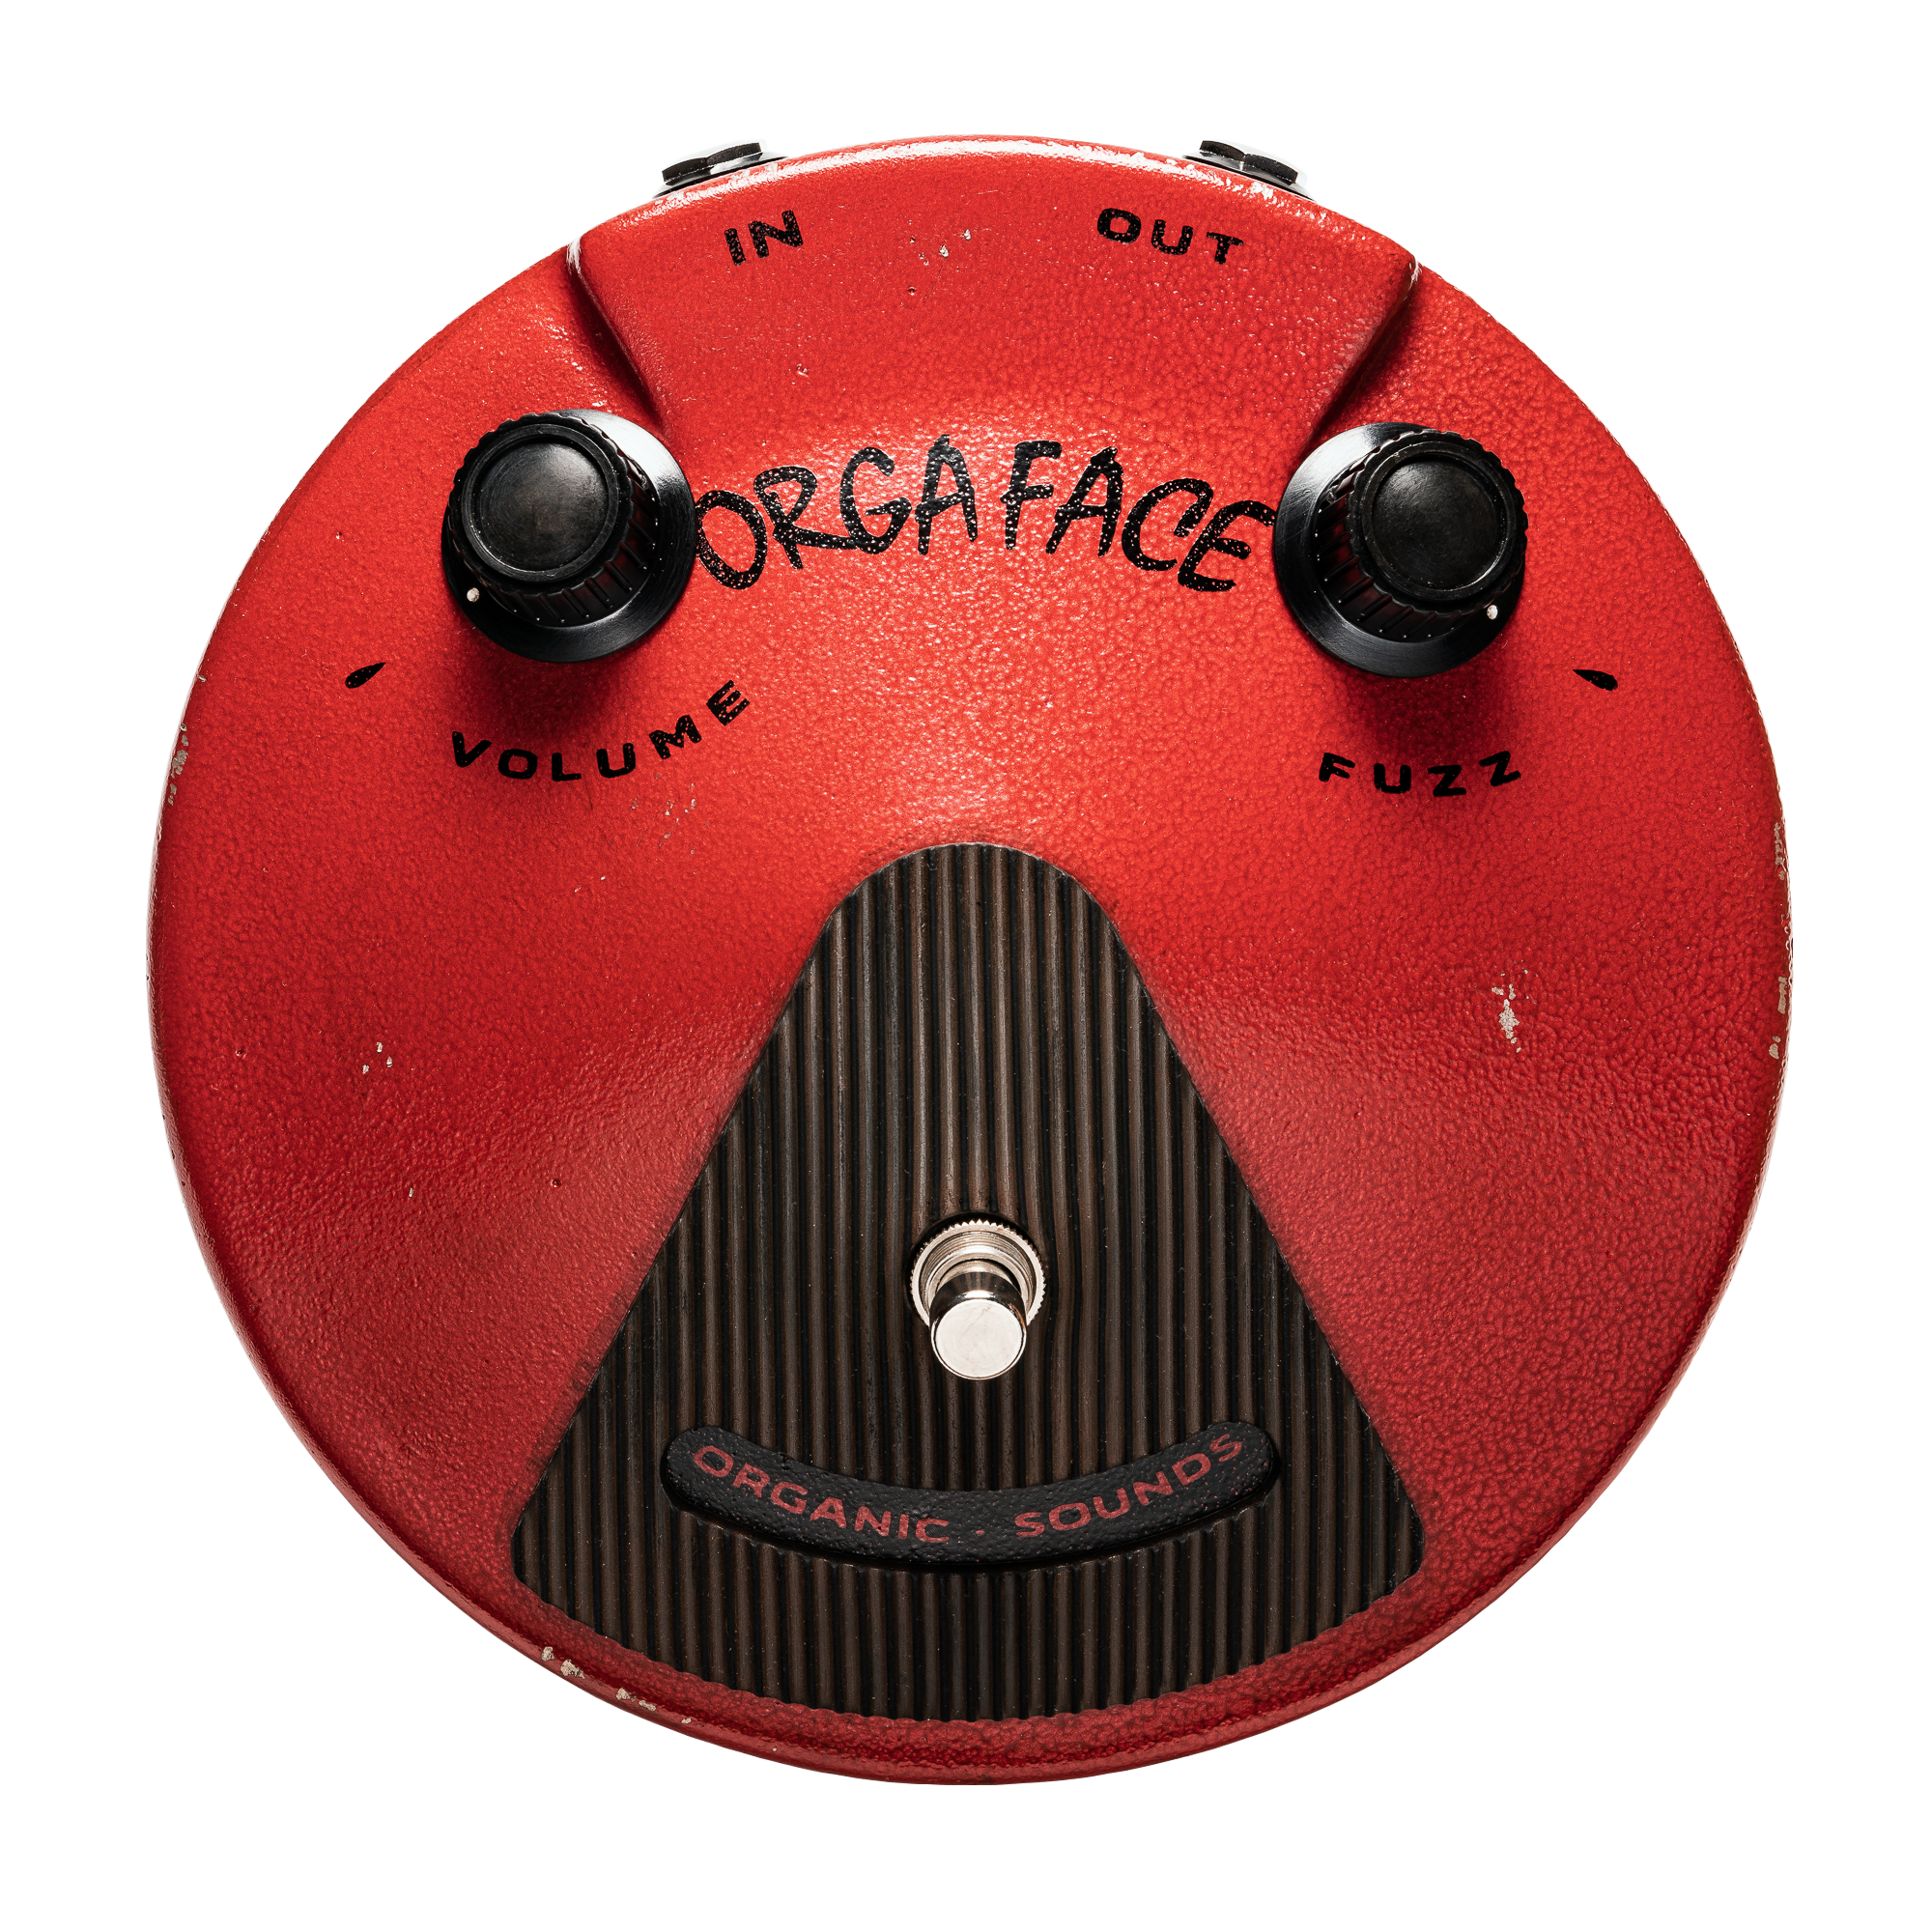 ORGA FACE Silicon / Aged Red | Organic Sounds